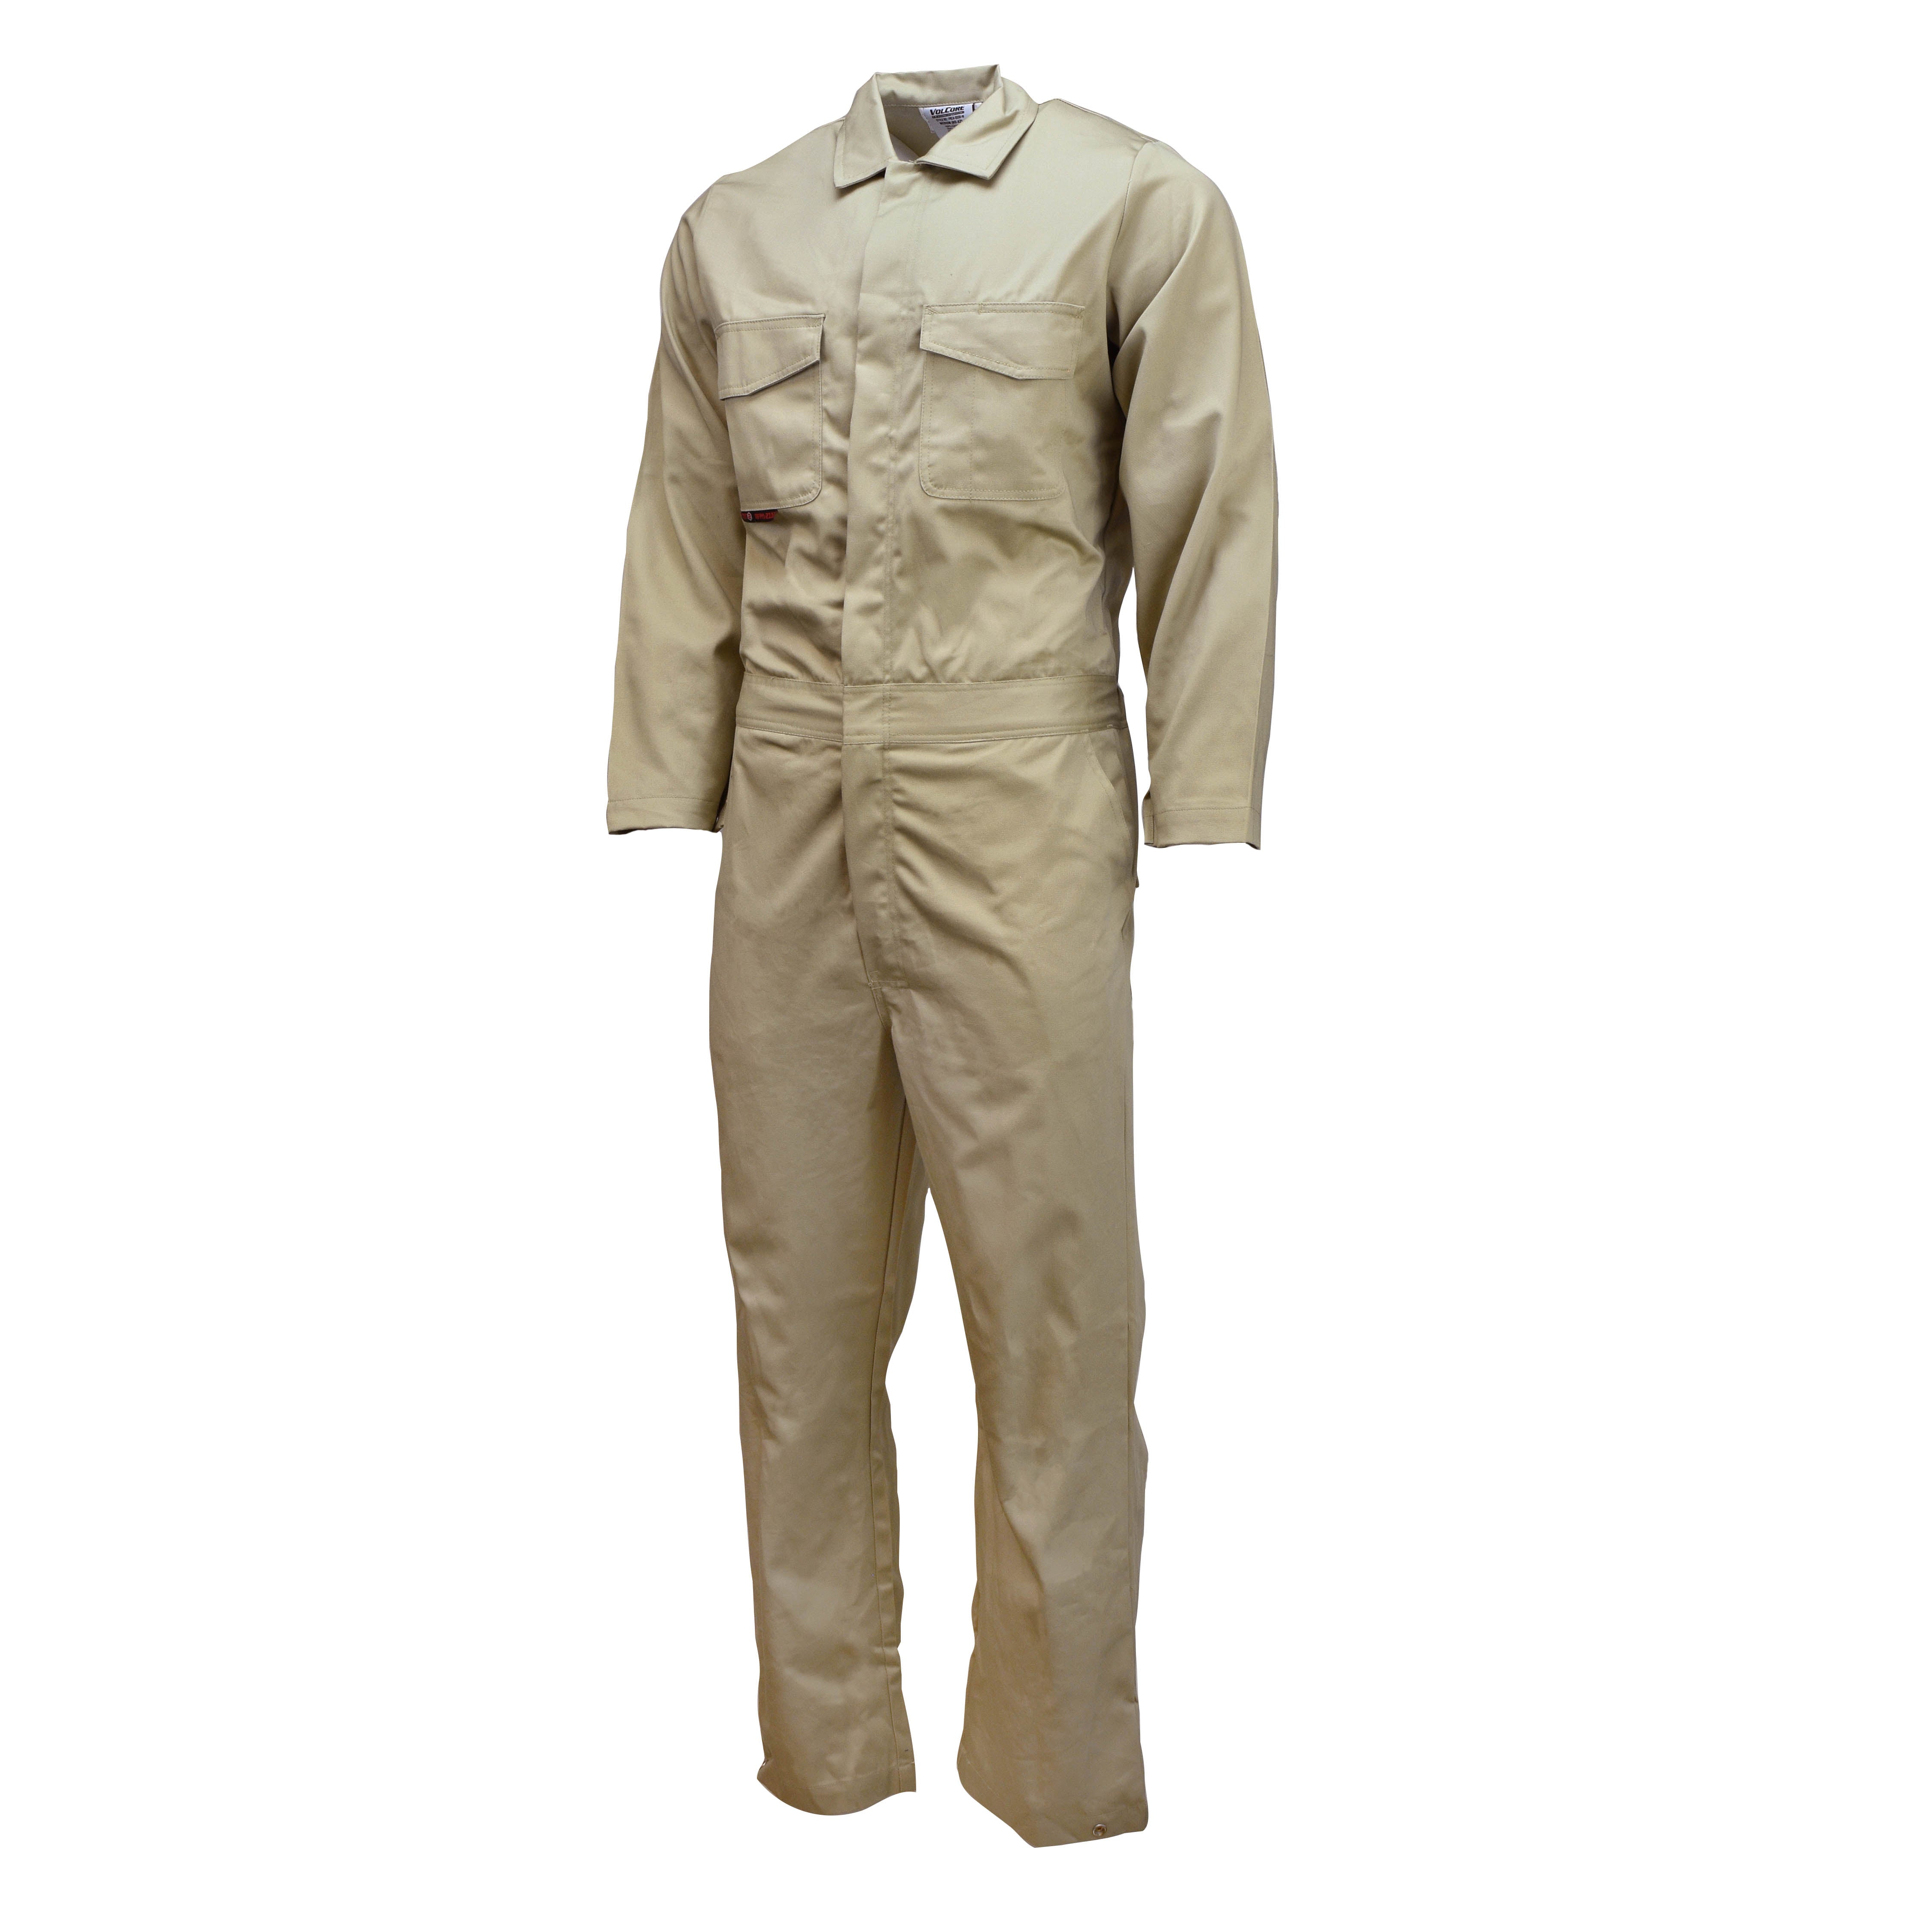 Radians FRCA-003 VolCore™ Cotton FR Coverall-eSafety Supplies, Inc